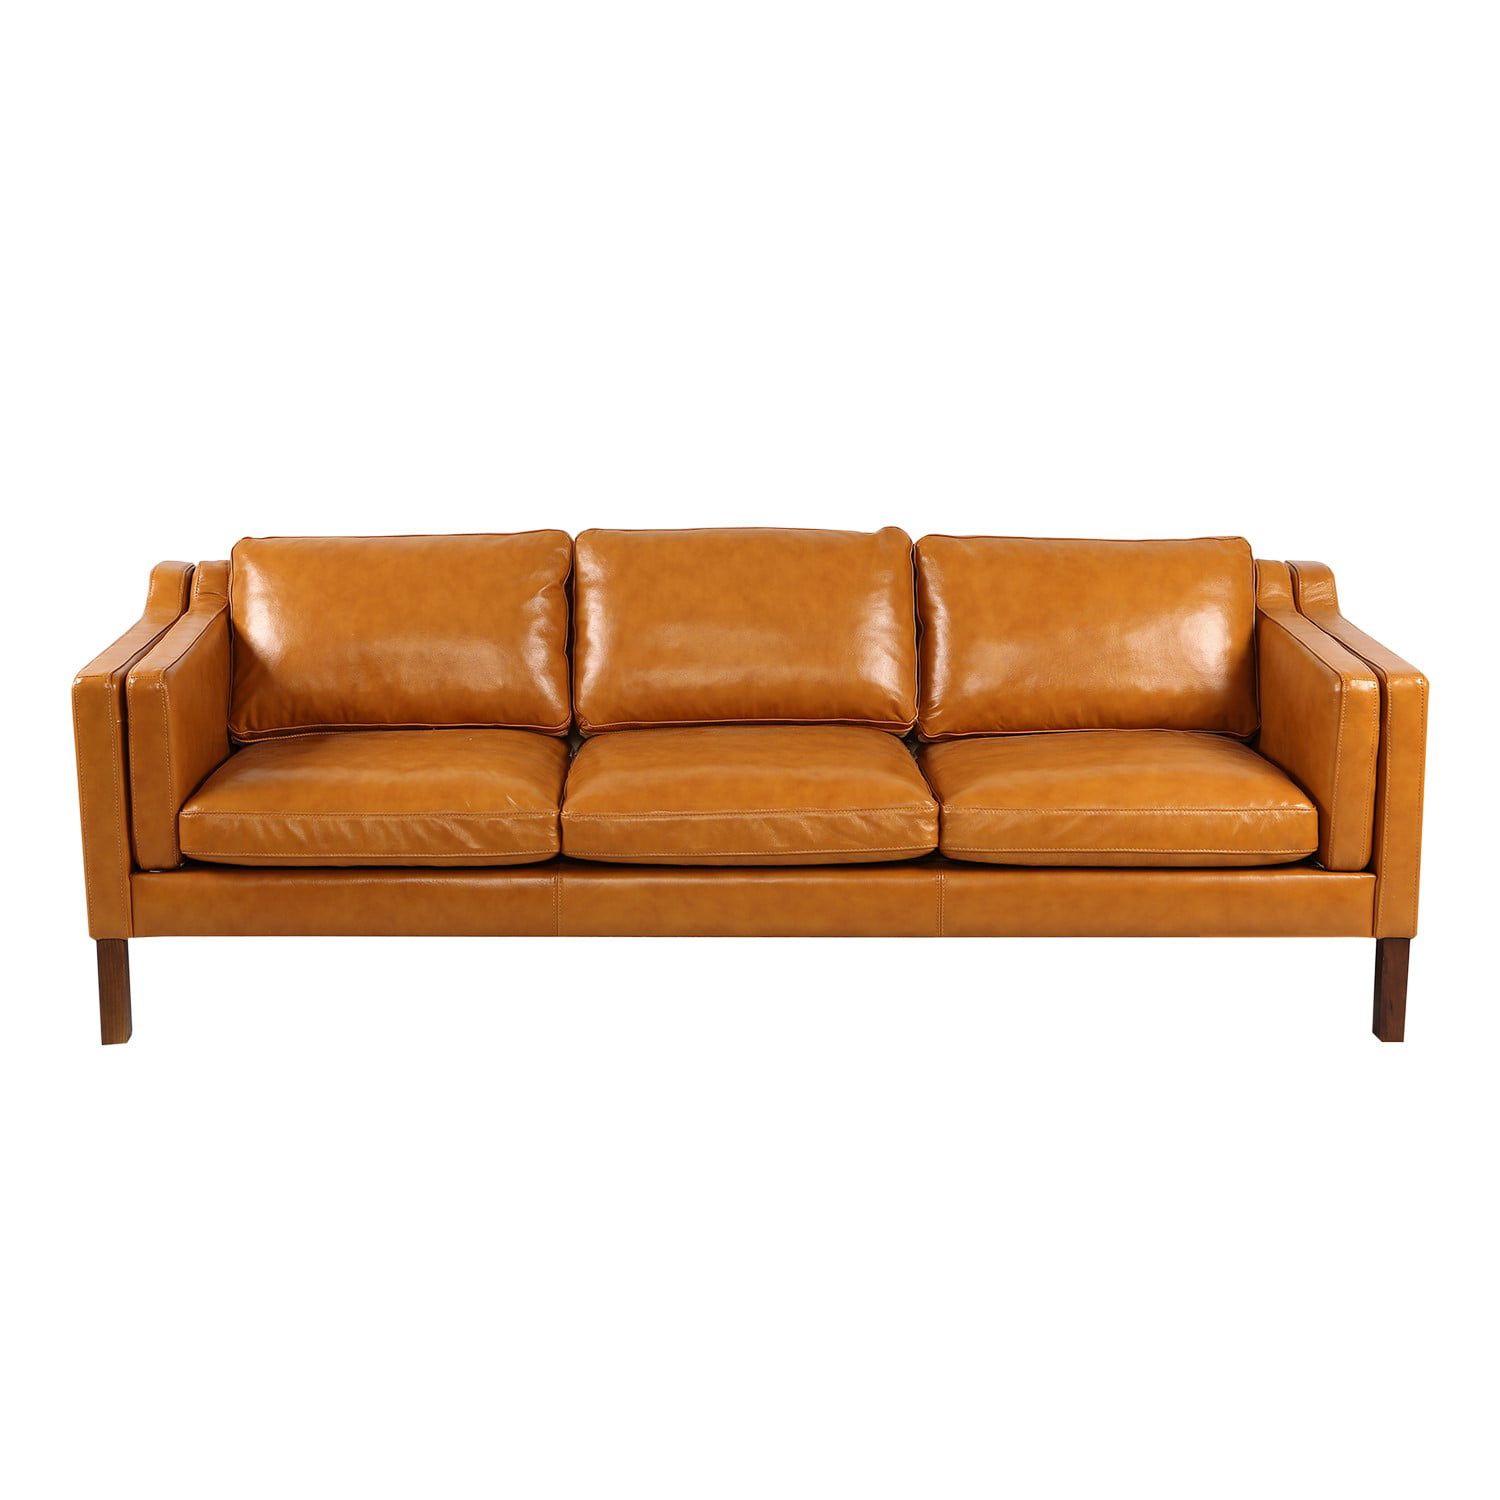 Kardiel Monroe Mid Century Modern Sofa 3 Seat, Tan Aniline Leather Intended For Mid Century Modern Sofas (View 8 of 20)